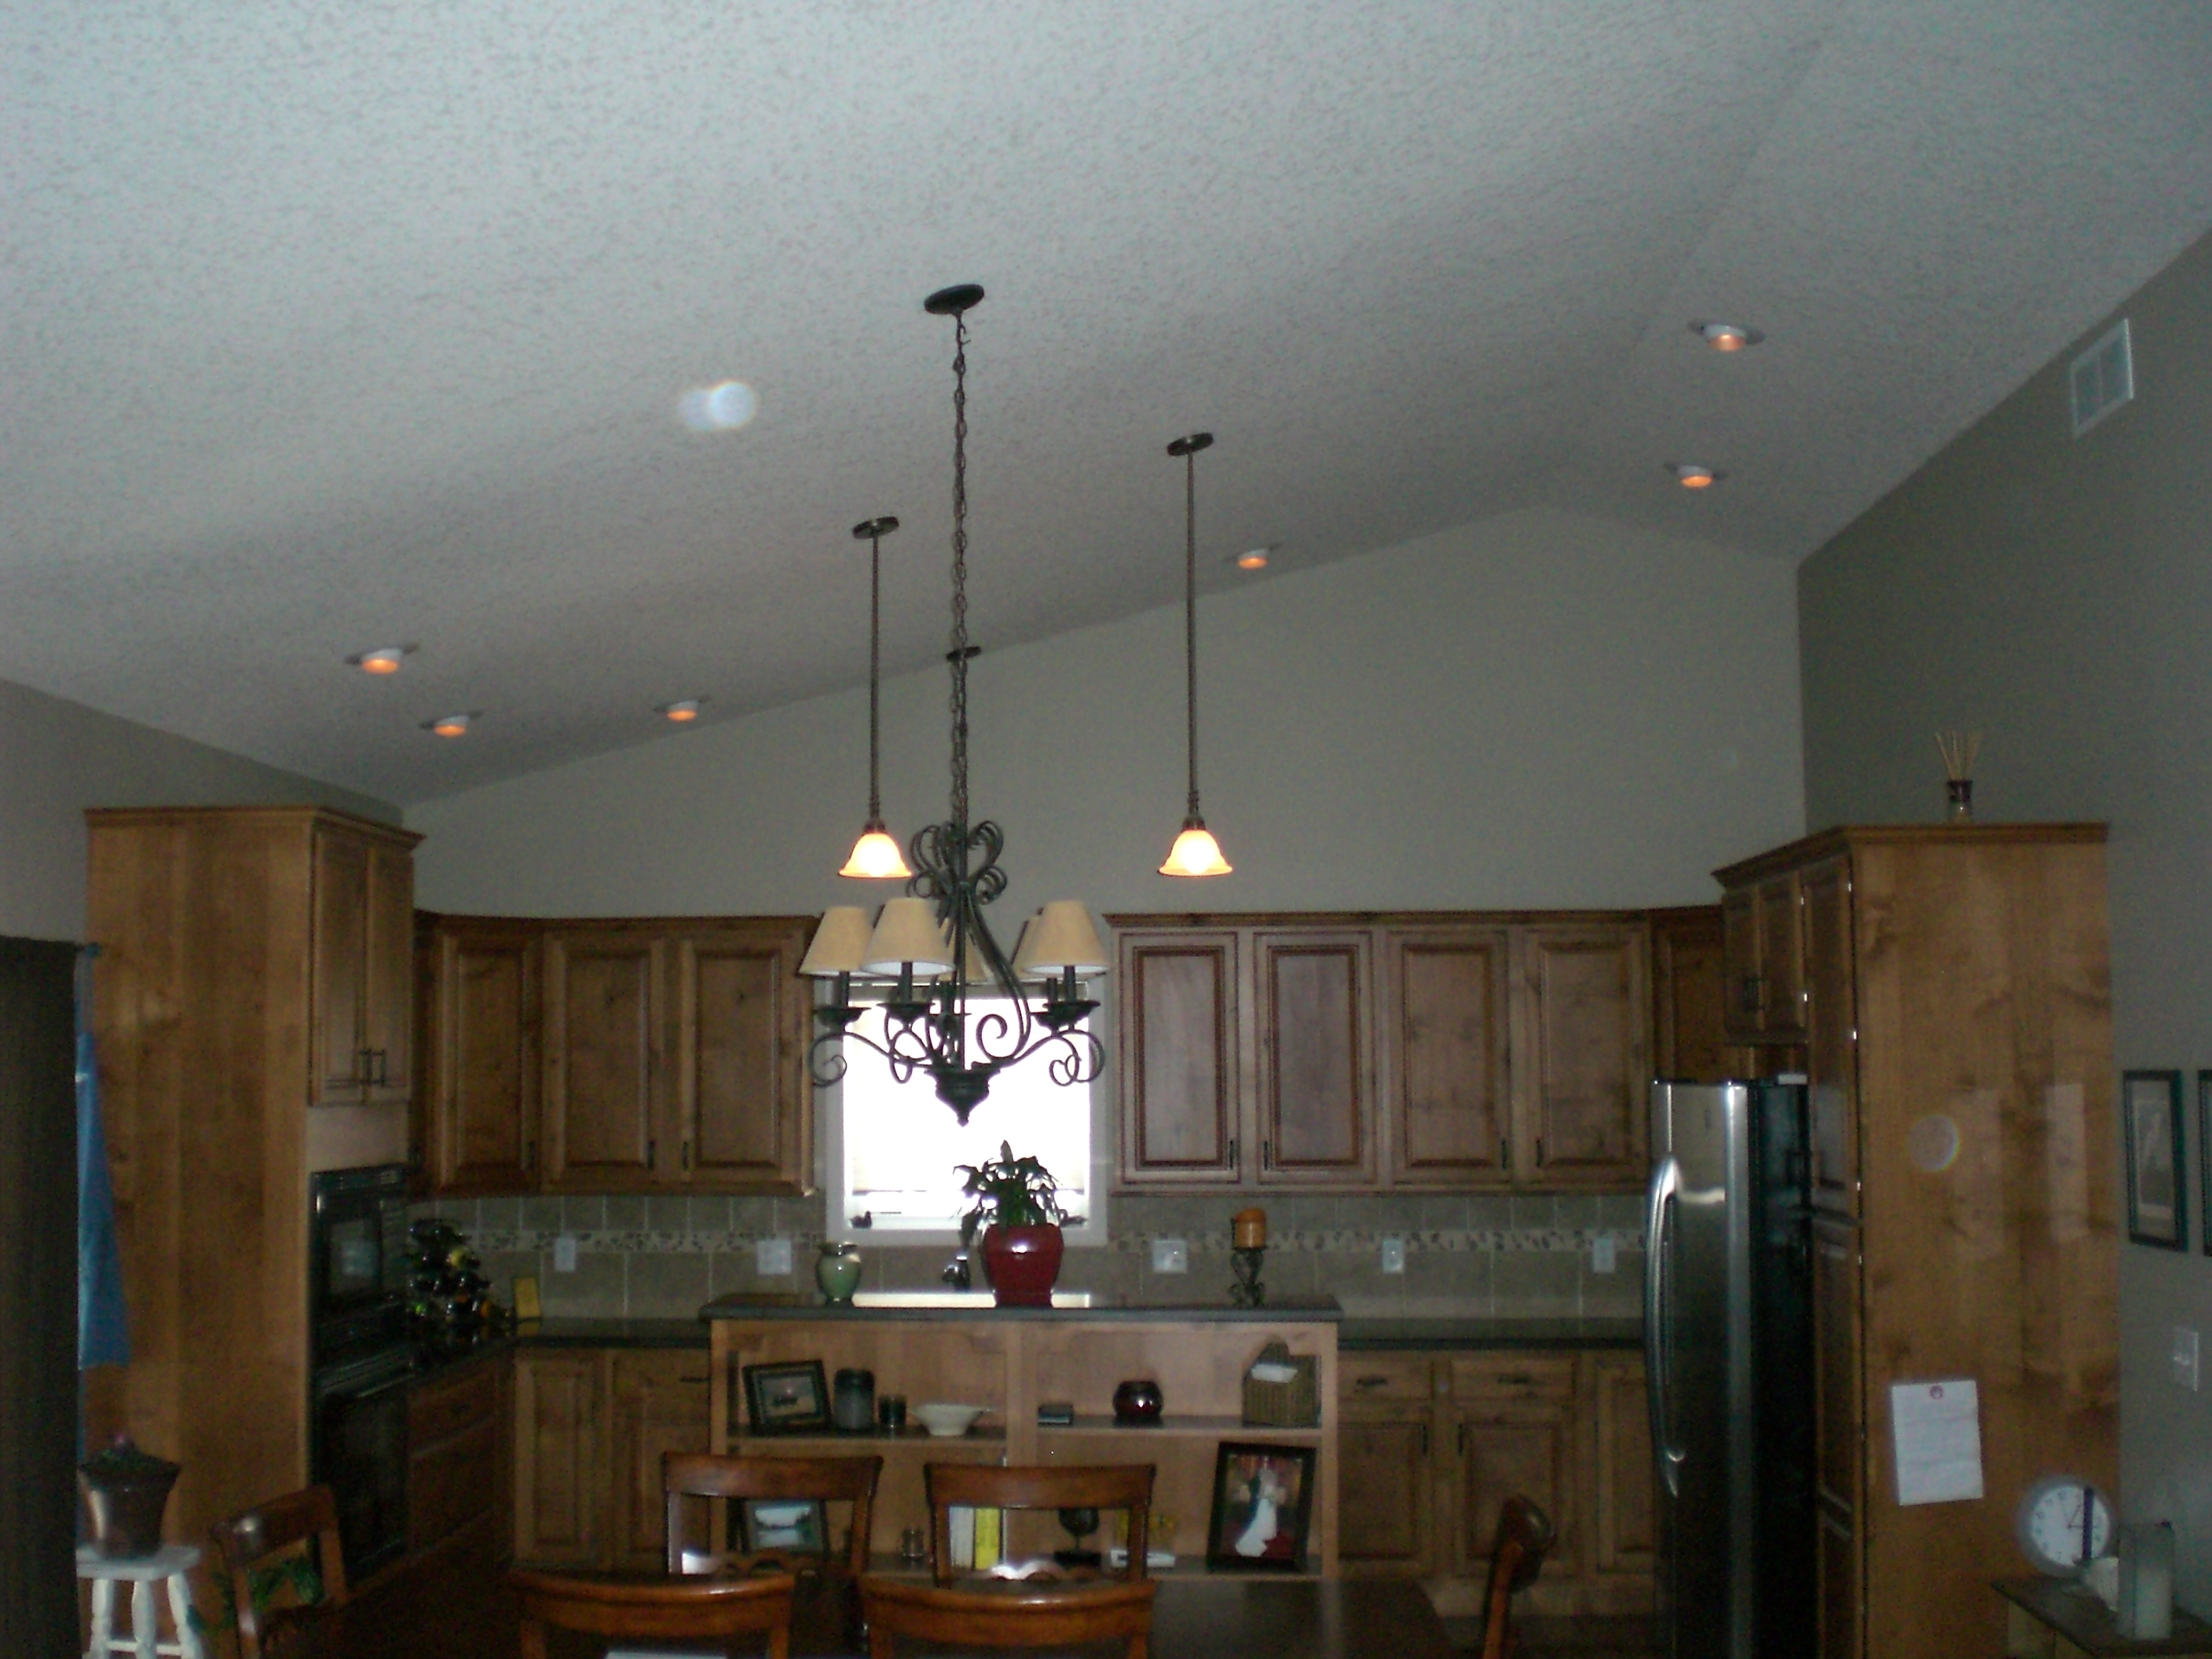 Recessed Can Lights For Vaulted Ceilings2816 X 2112